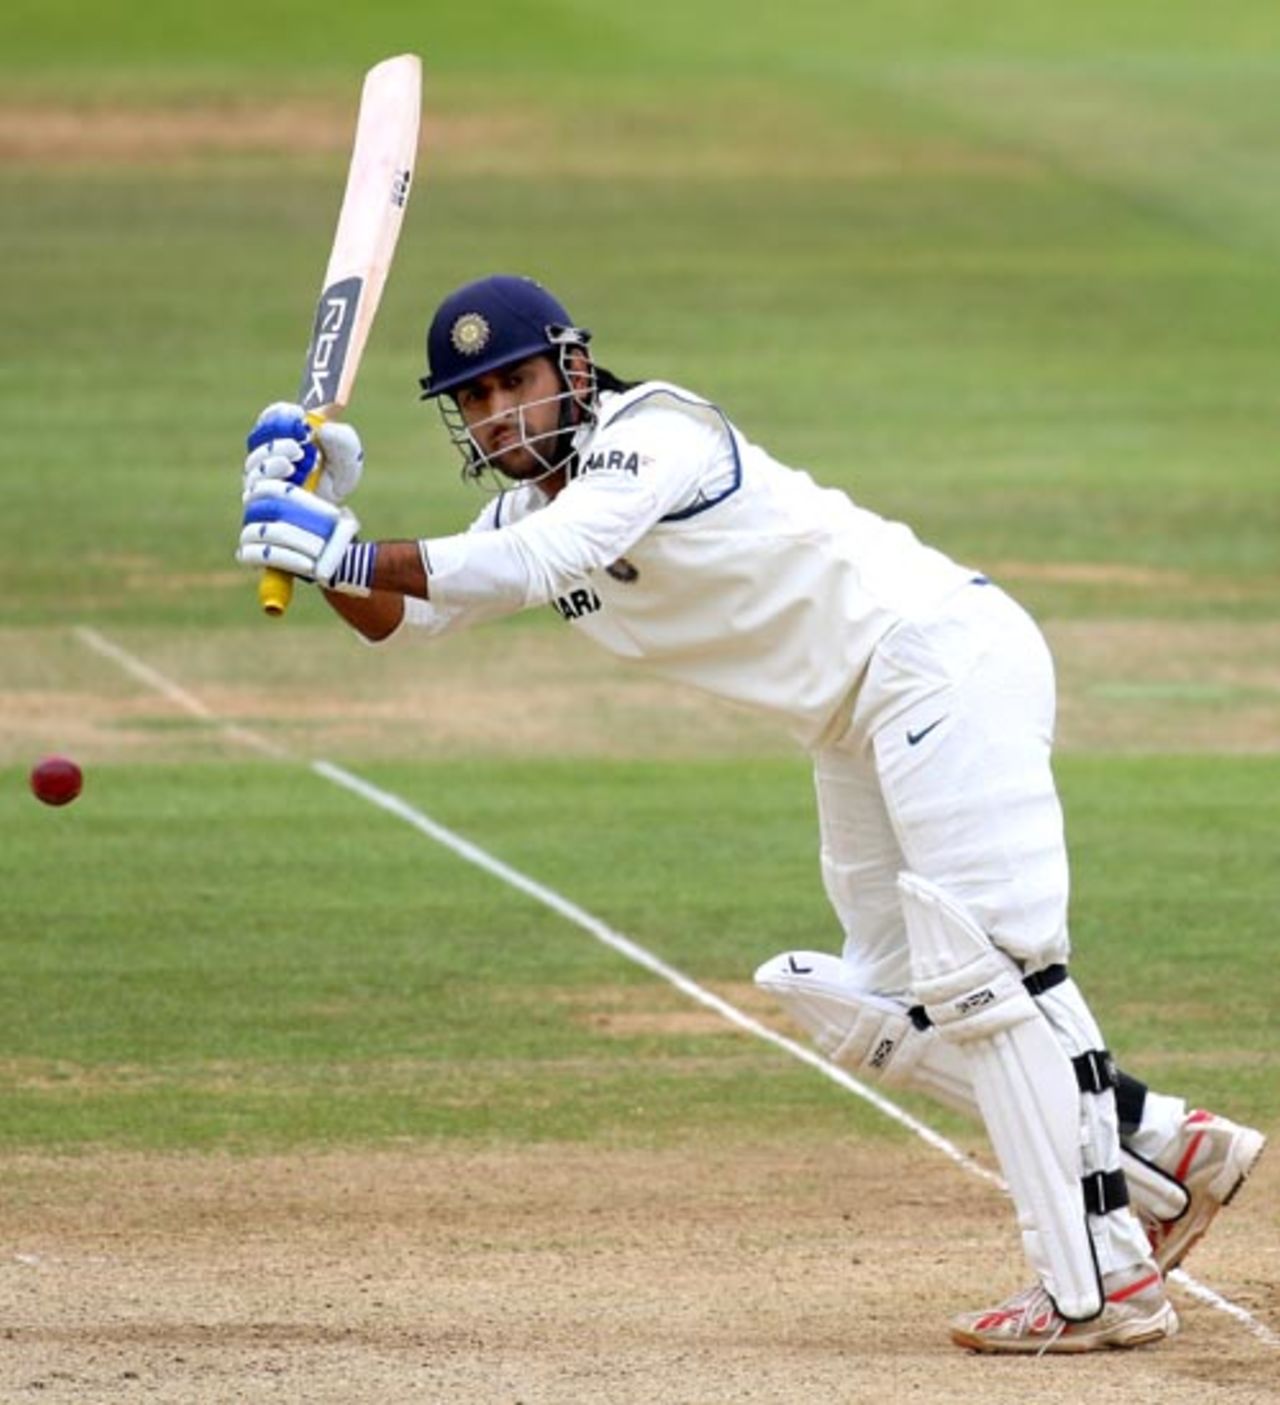 Mahendra Singh Dhoni flicks the ball to the midwicket boundary, England v India, 1st Test, Lord's, 5th day, July 23, 2007 